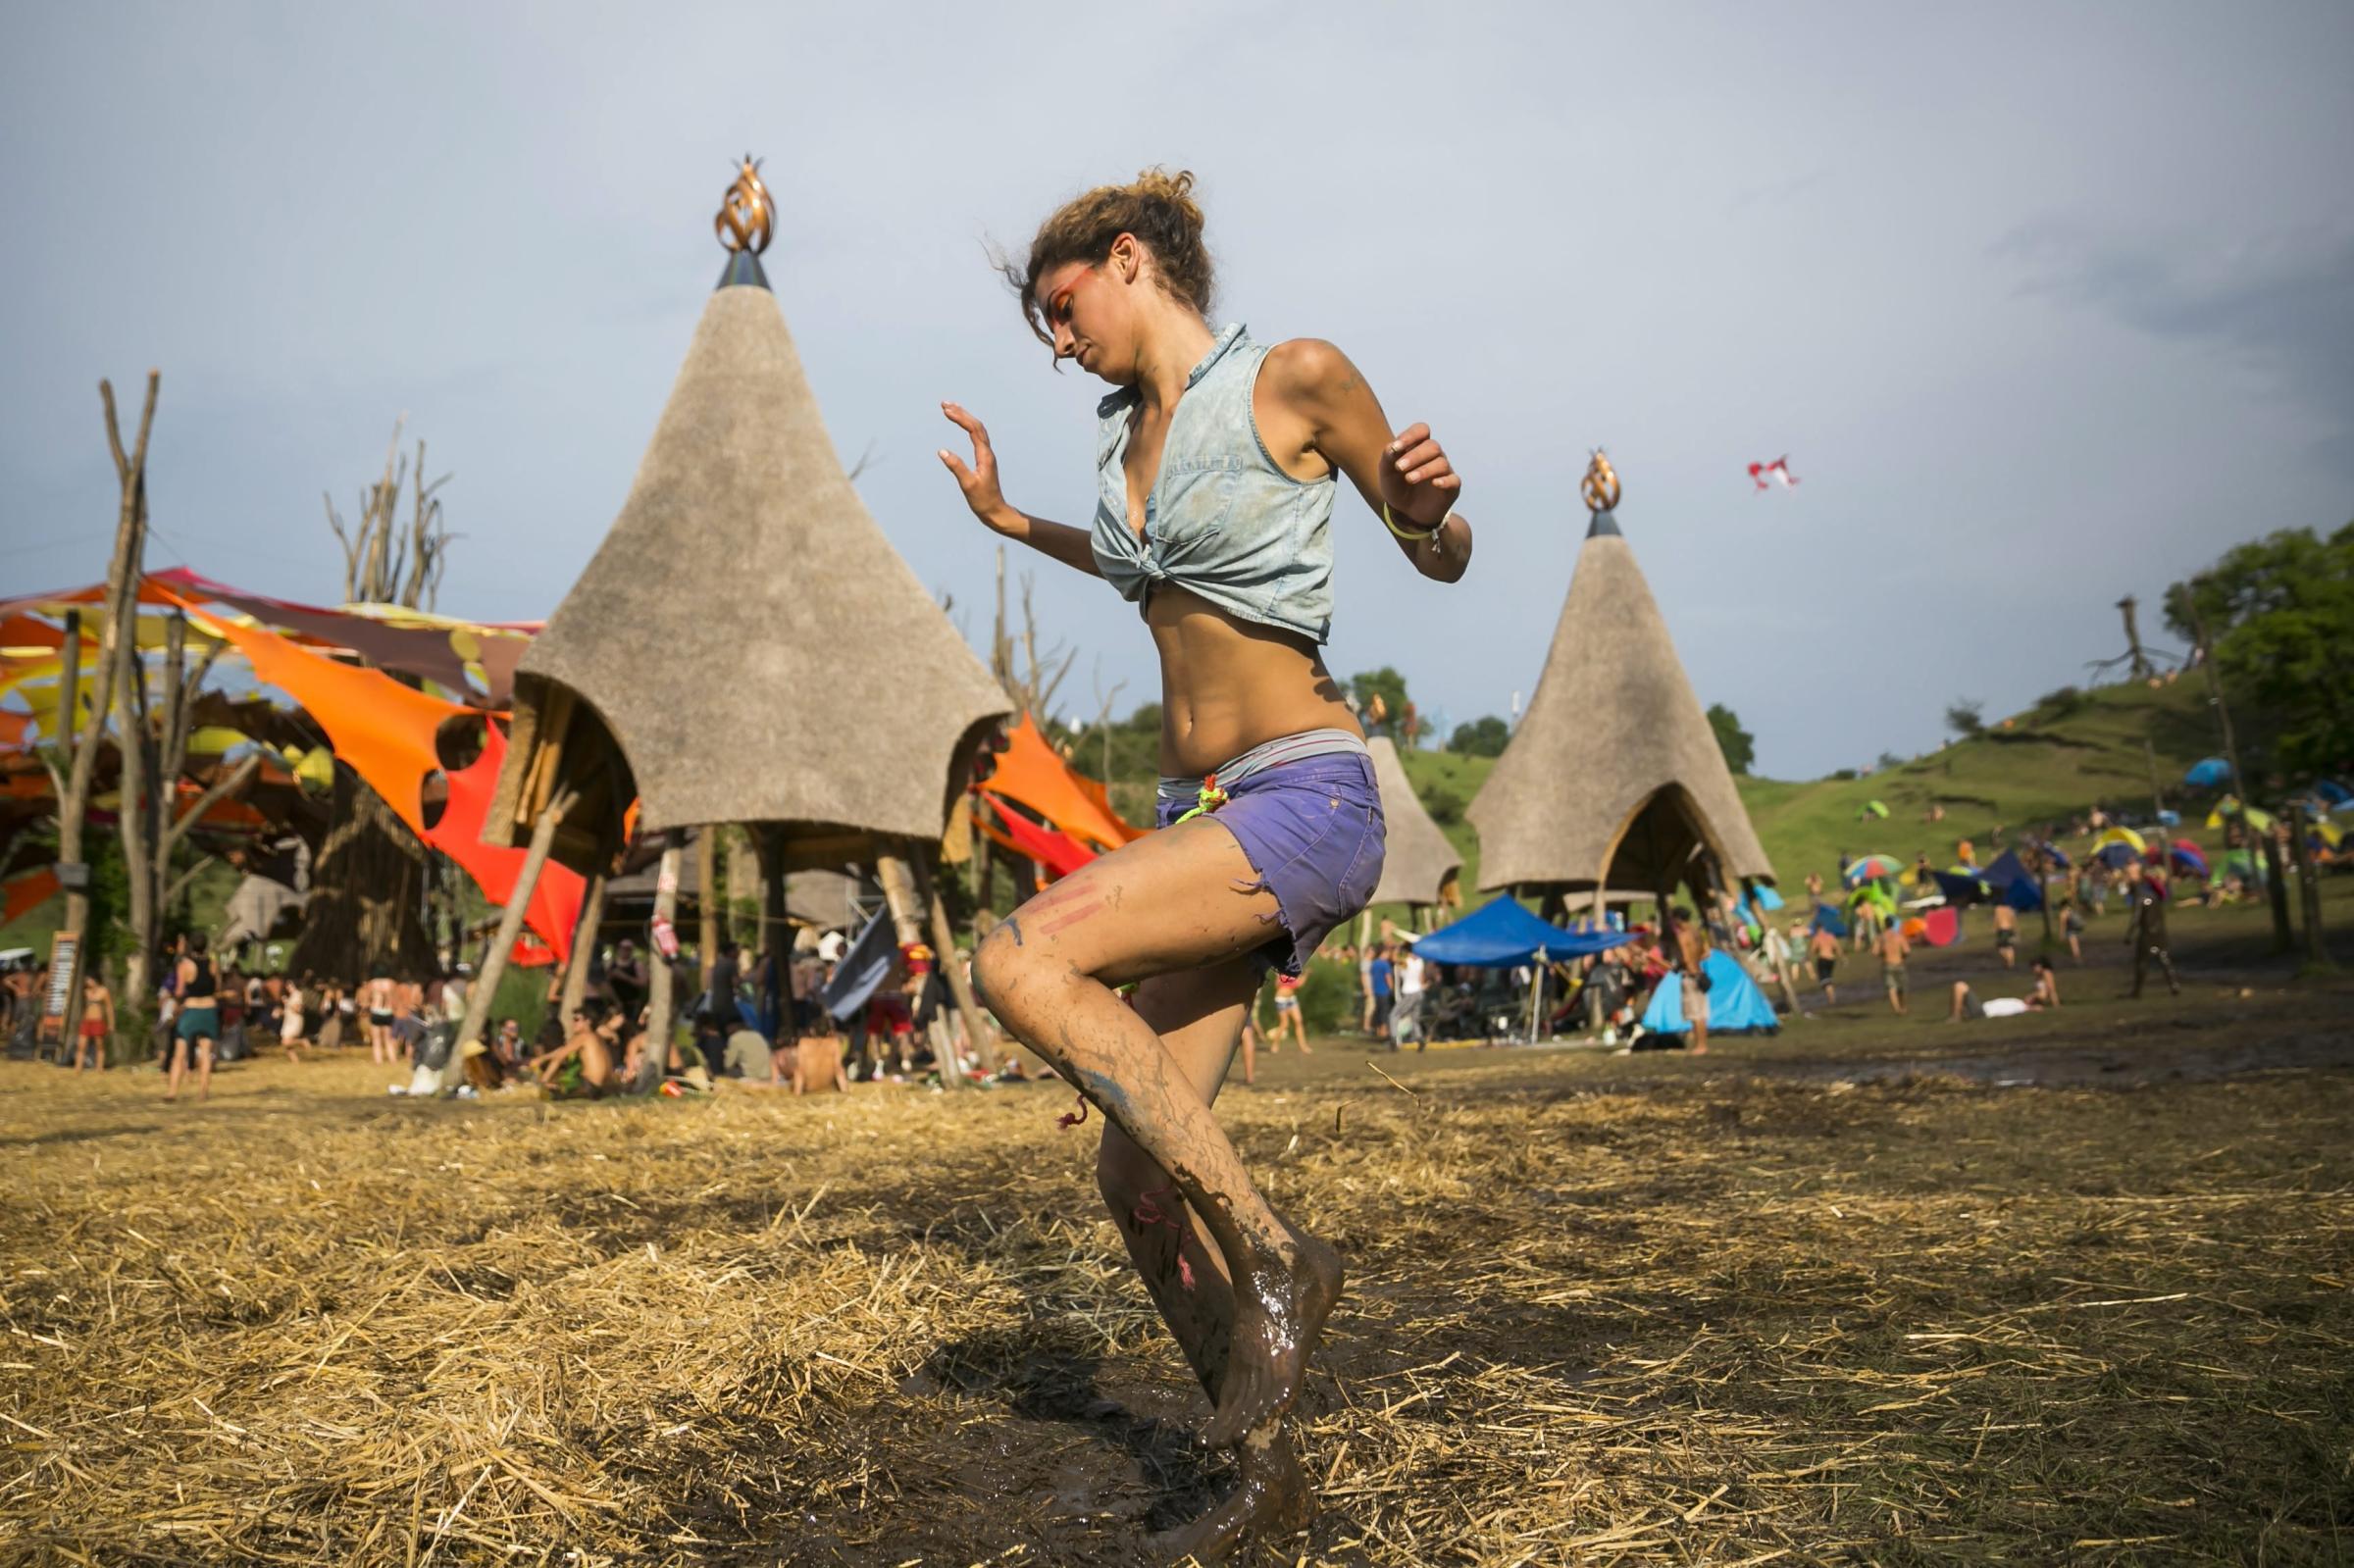 A young woman dances during the 2014 O.Z.O.R.A. Festival, described by organizers as the Psychedelic Tribal Gathering, near the village of Ozora, south of Budapest, Hungary on August 2, 2014.